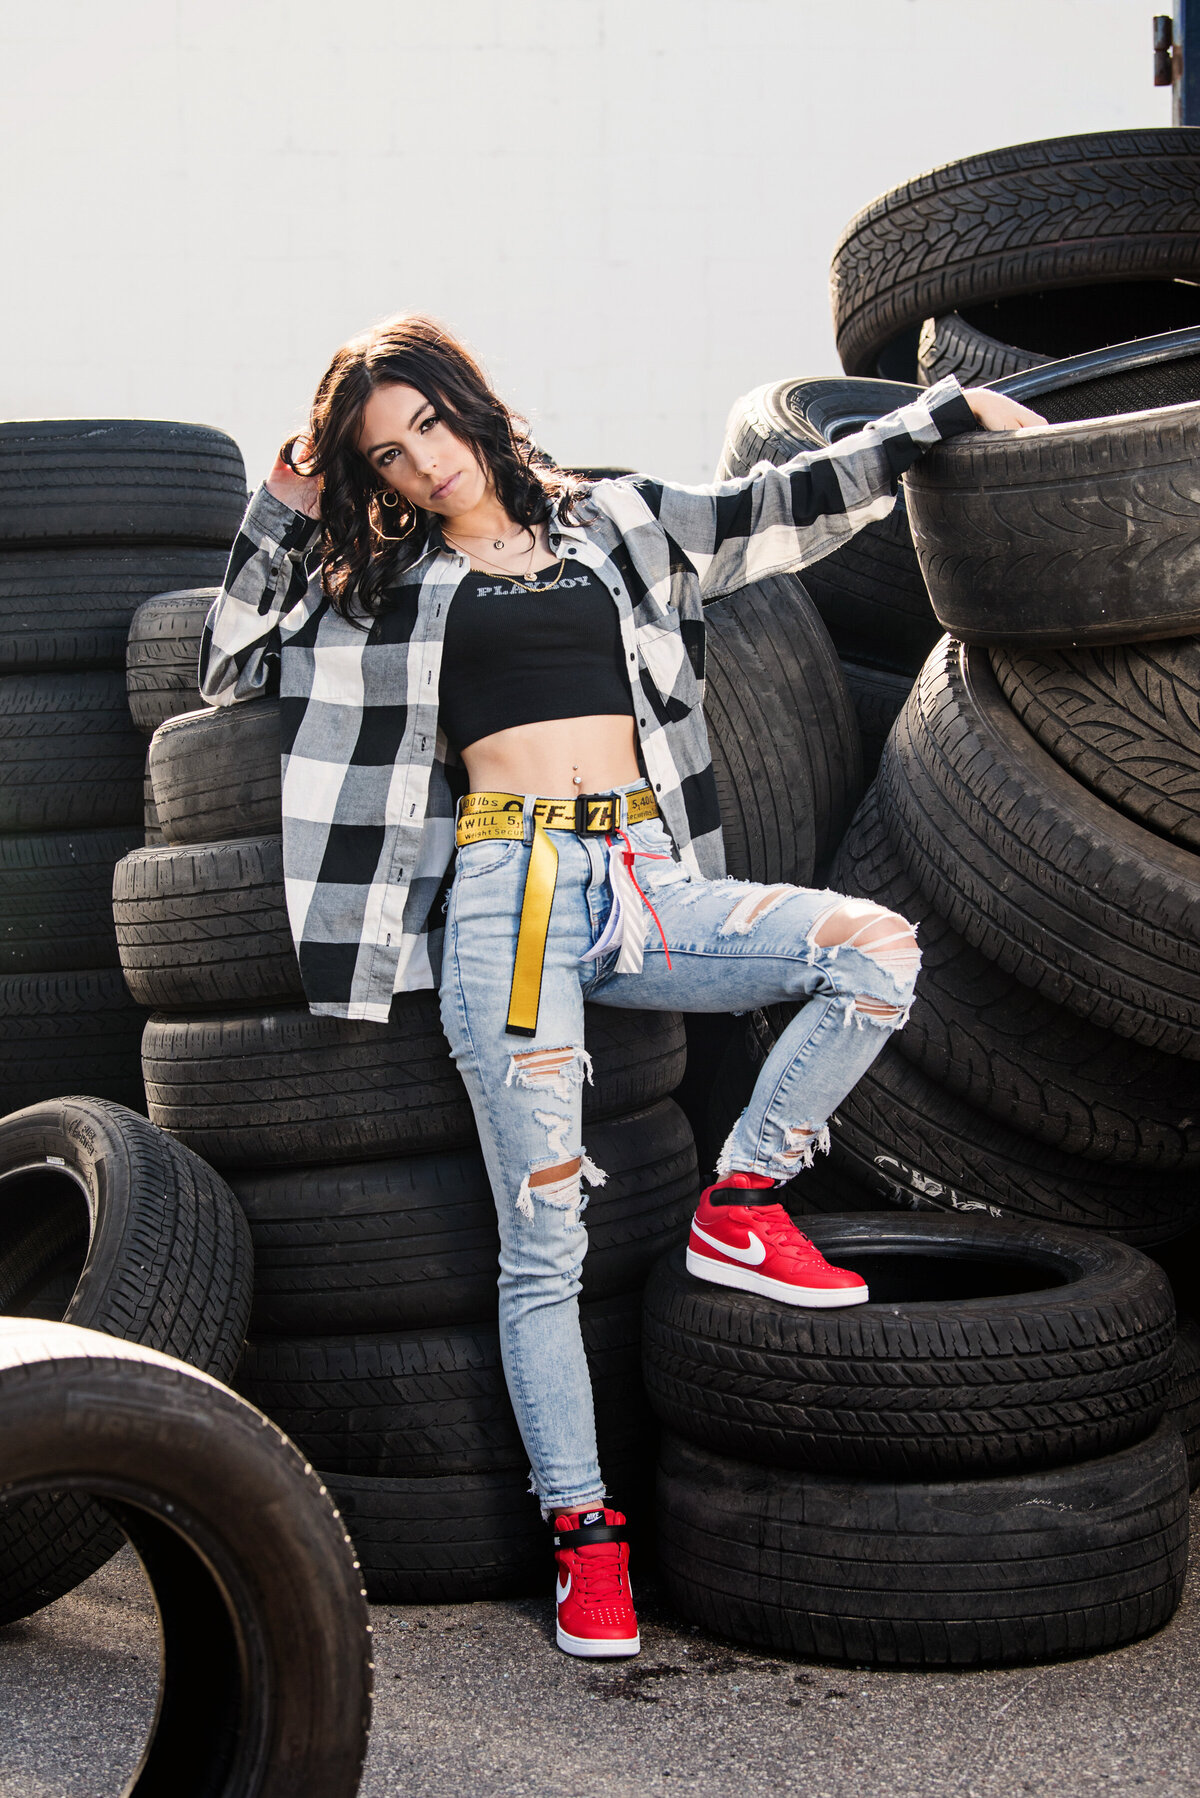 high school senior girl in plaid and pile of tires